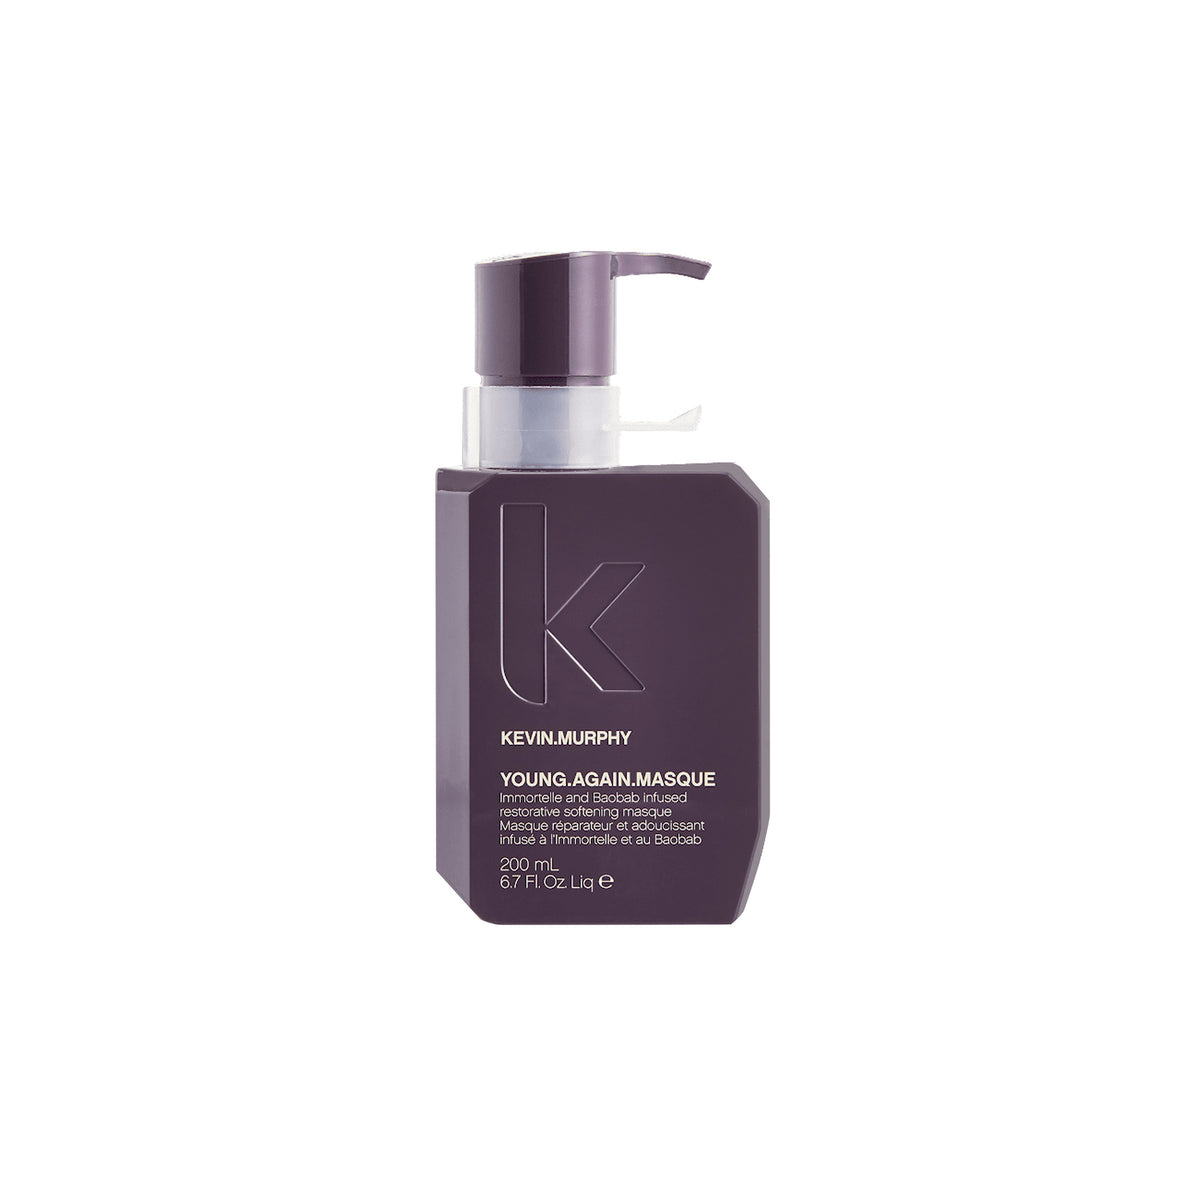 Kevin Murphy YOUNG.AGAIN MASQUE 200ml